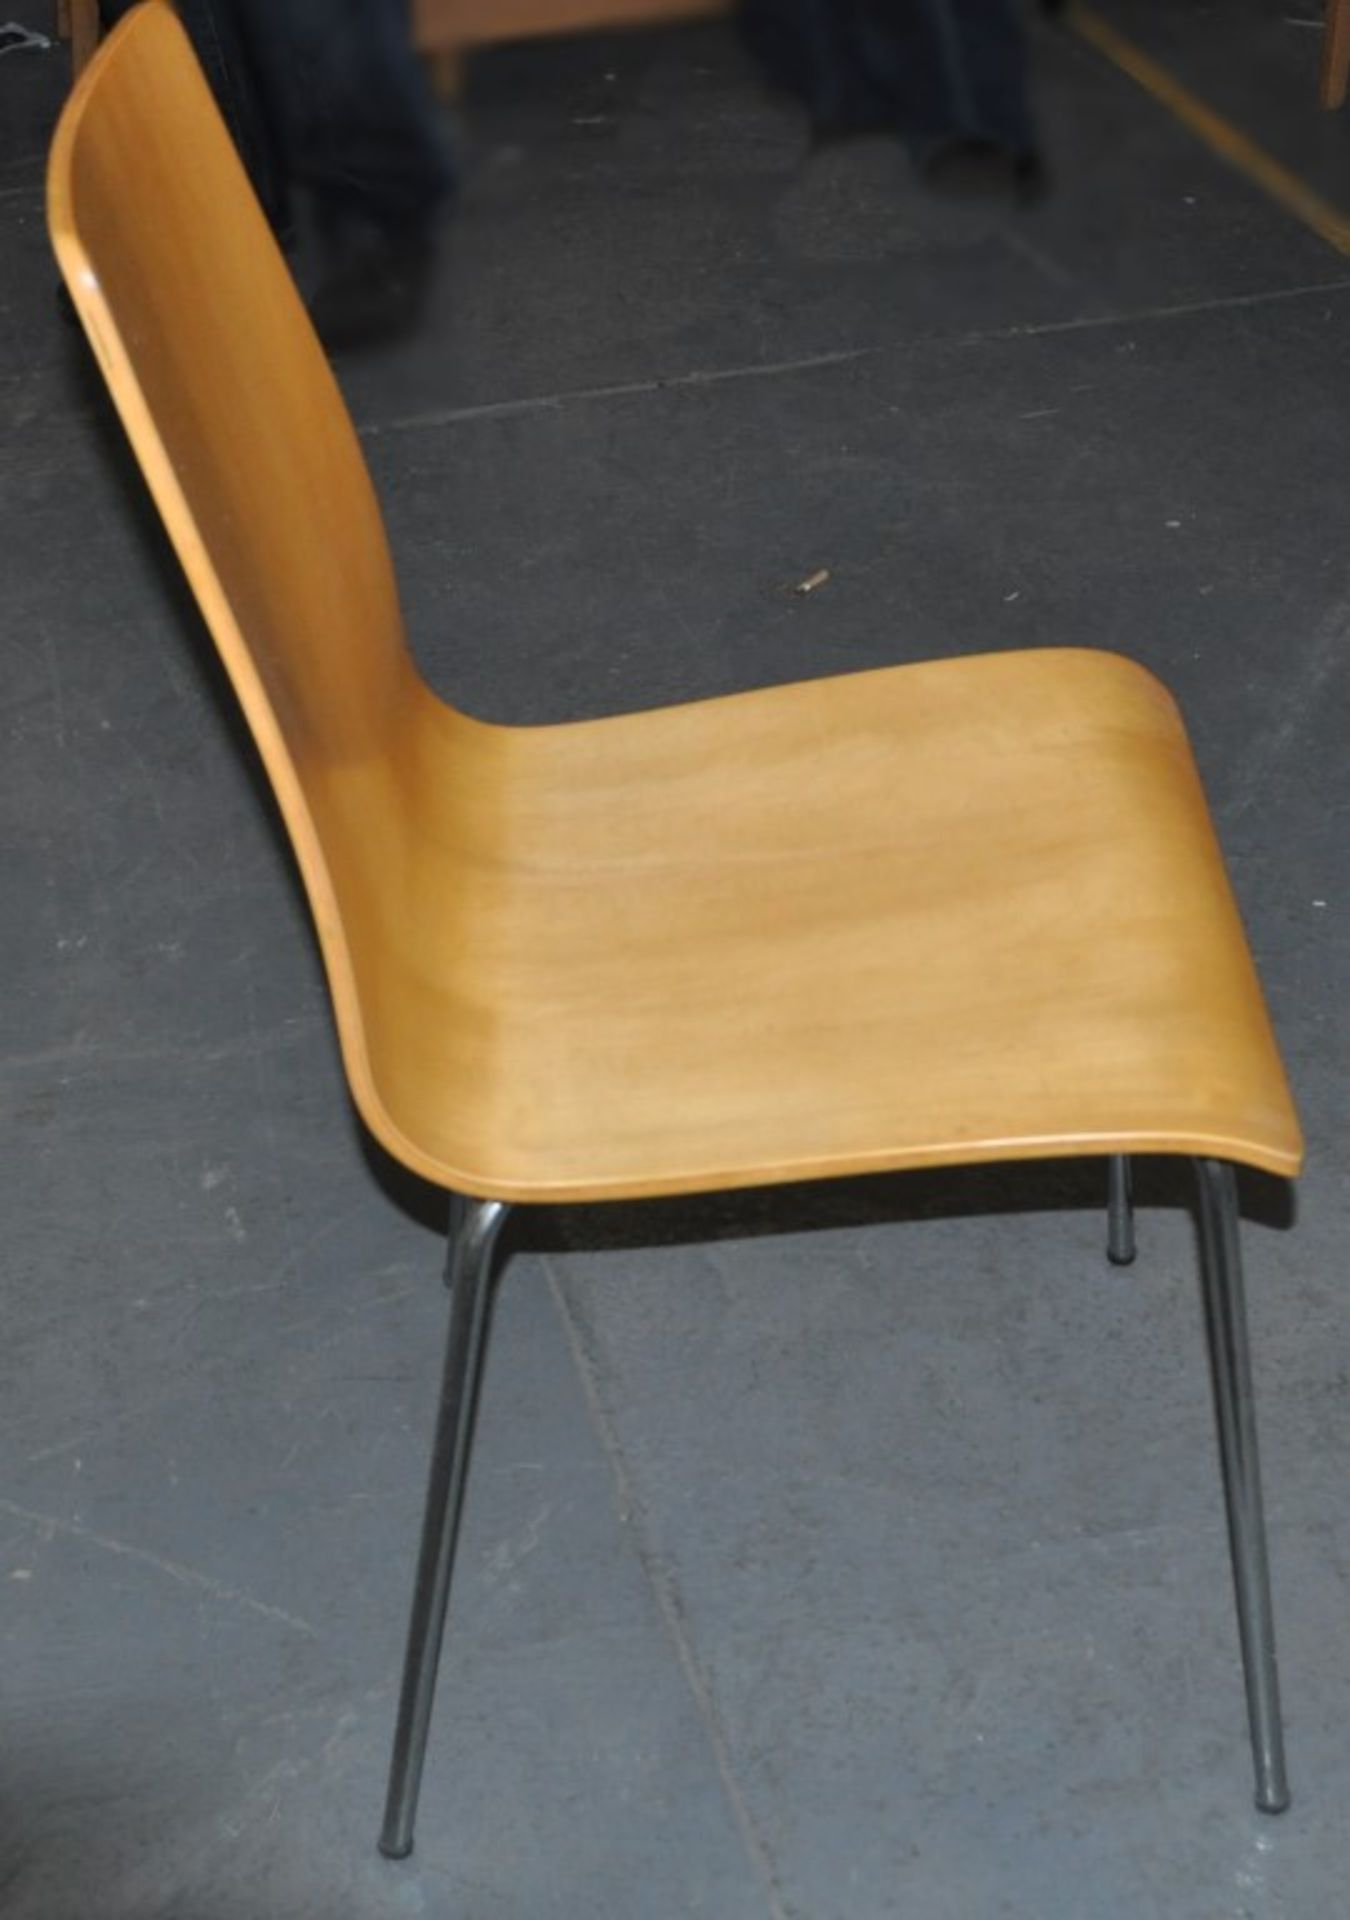 1 x Beech 4ft Table With 4 x Matching Beech Chairs - Ref CH002 – Features Metal Legs, and A - Image 4 of 4